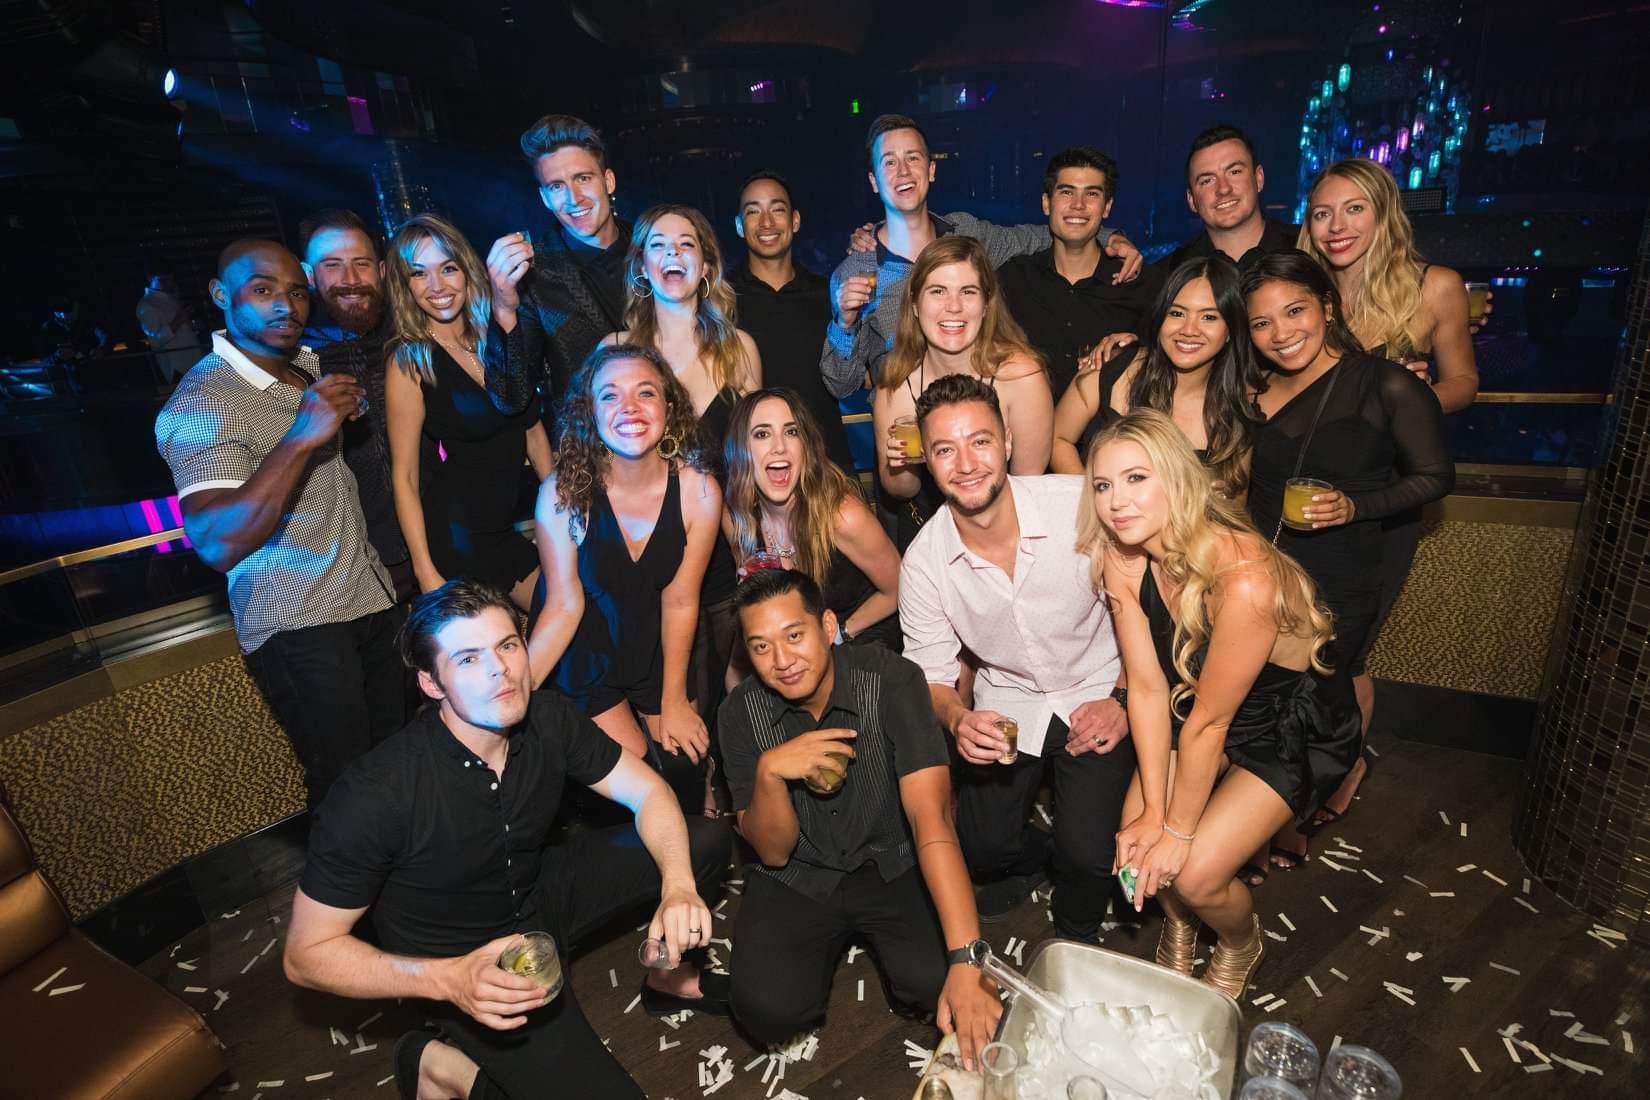 How to Get Into Las Vegas Nightclubs for Free?